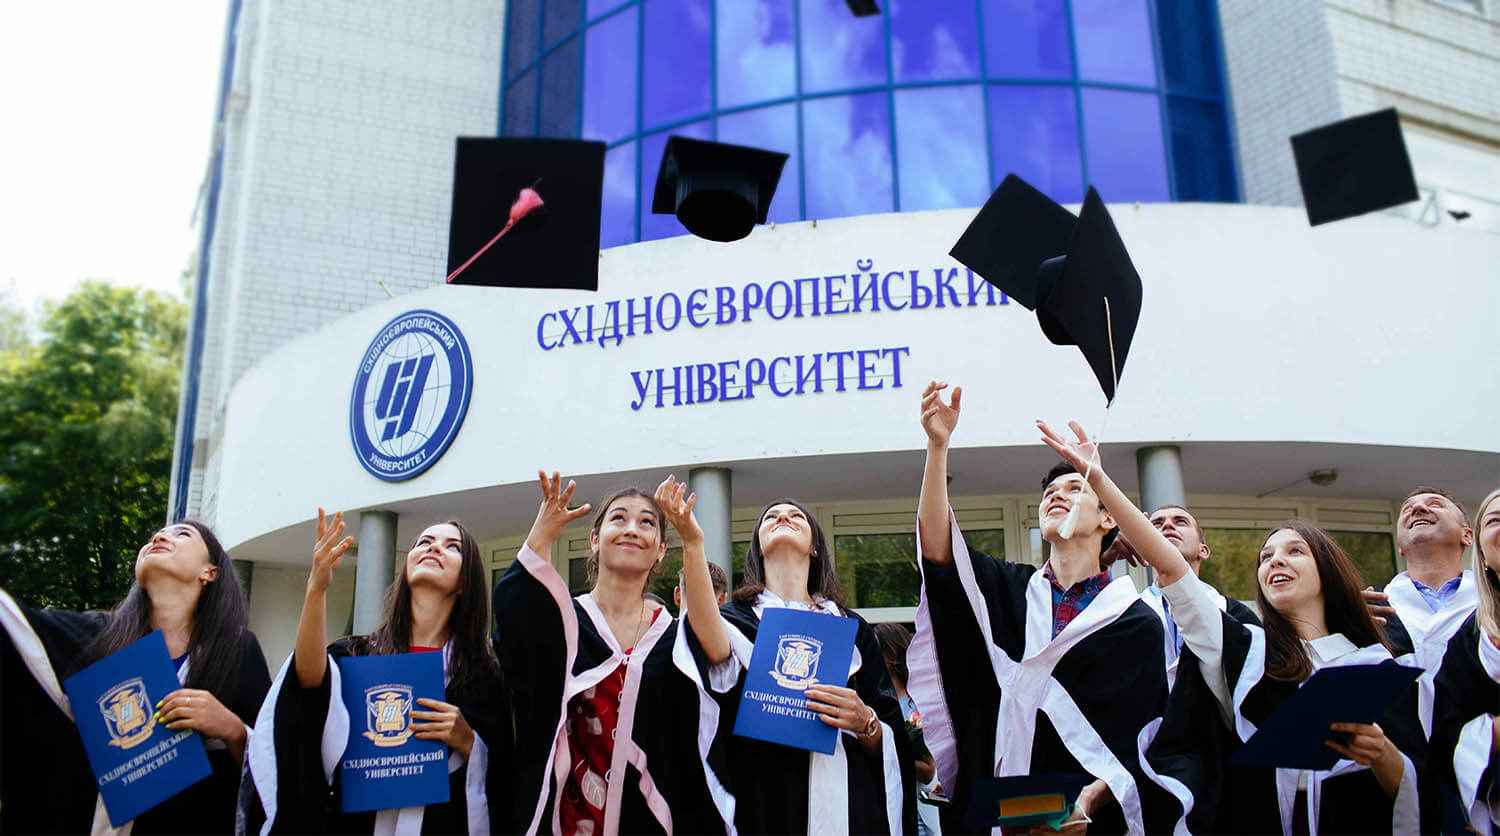 videos/videos-bg/students-in-front-of-the-university.jpg